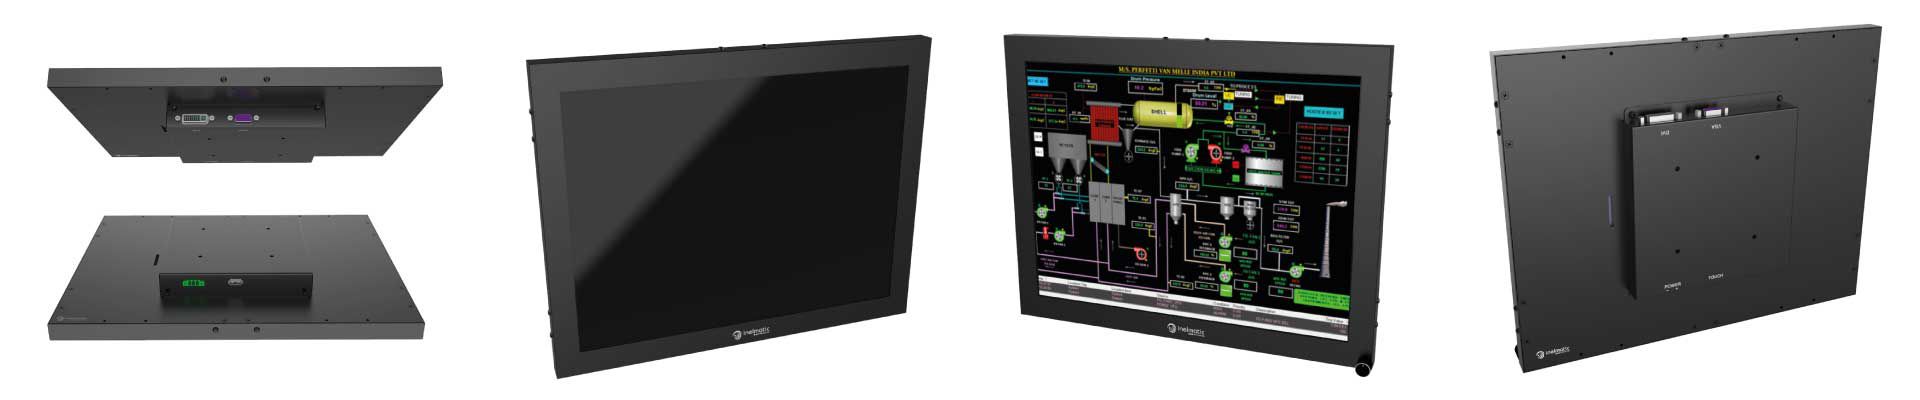 Industrial touch monitor - Inelmatic 